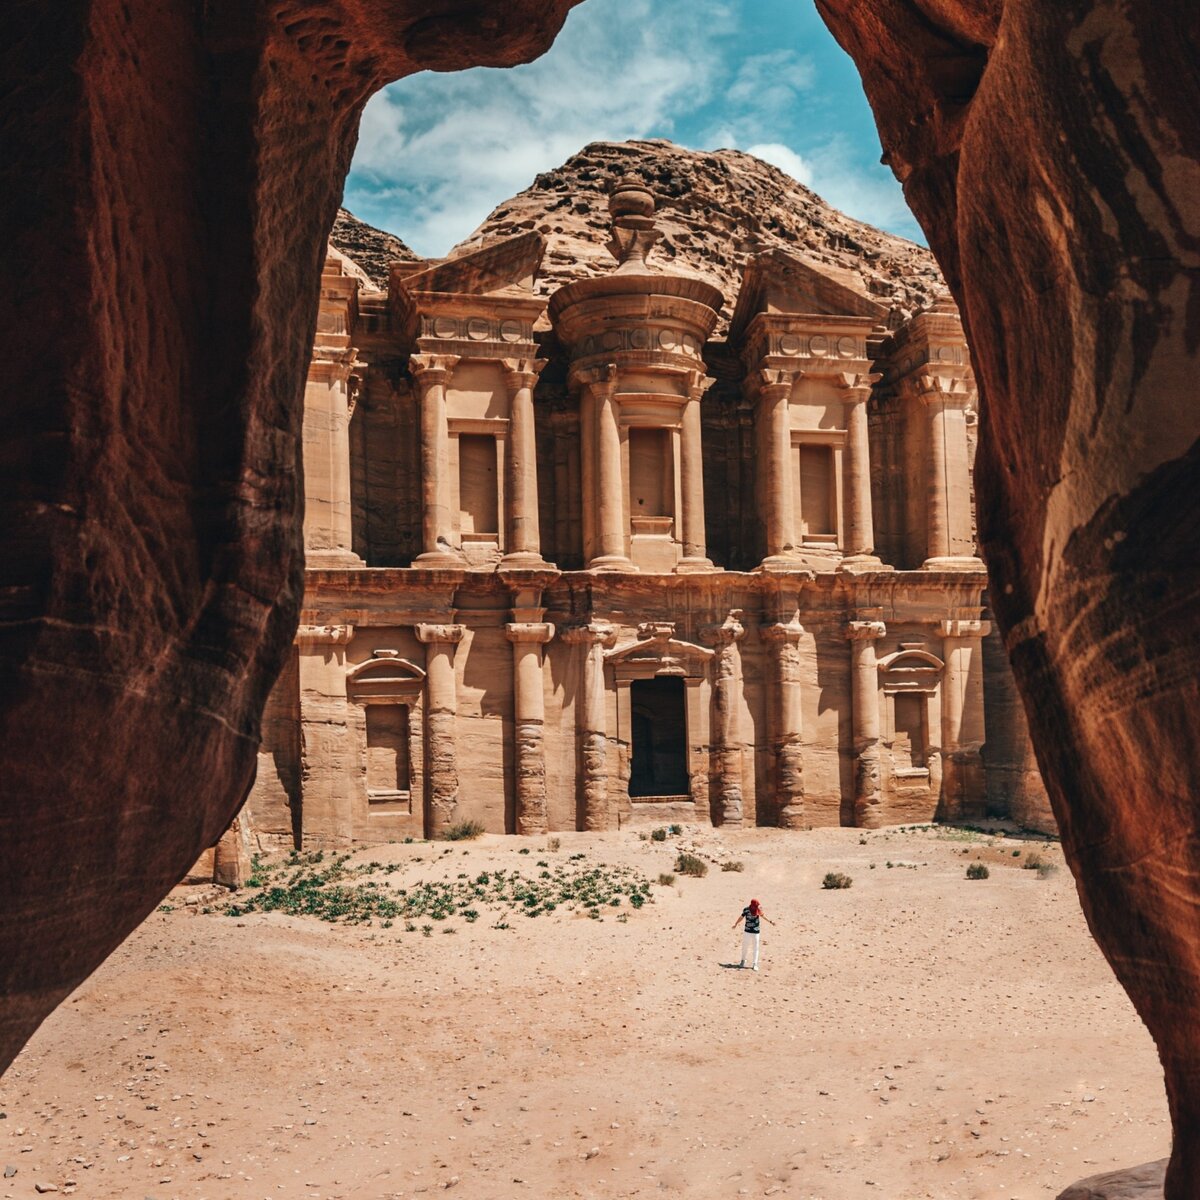 View of The Treasury in Petra